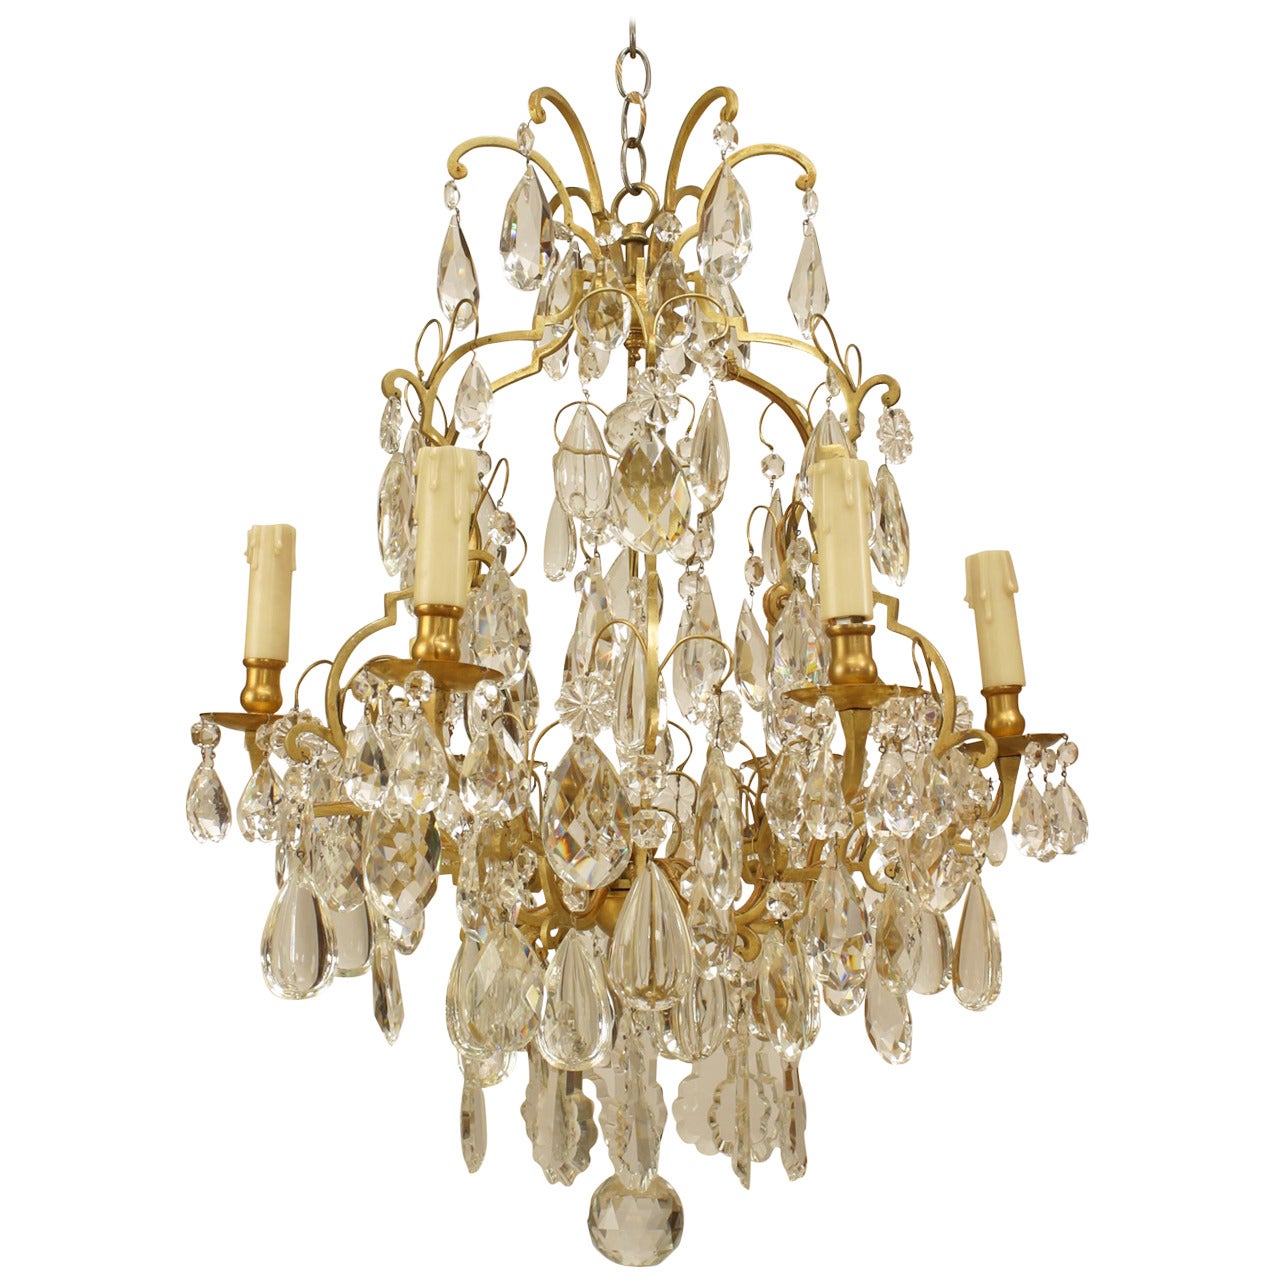 Turn of the Century French Louis XV Style Bronze and Crystal Chandelier